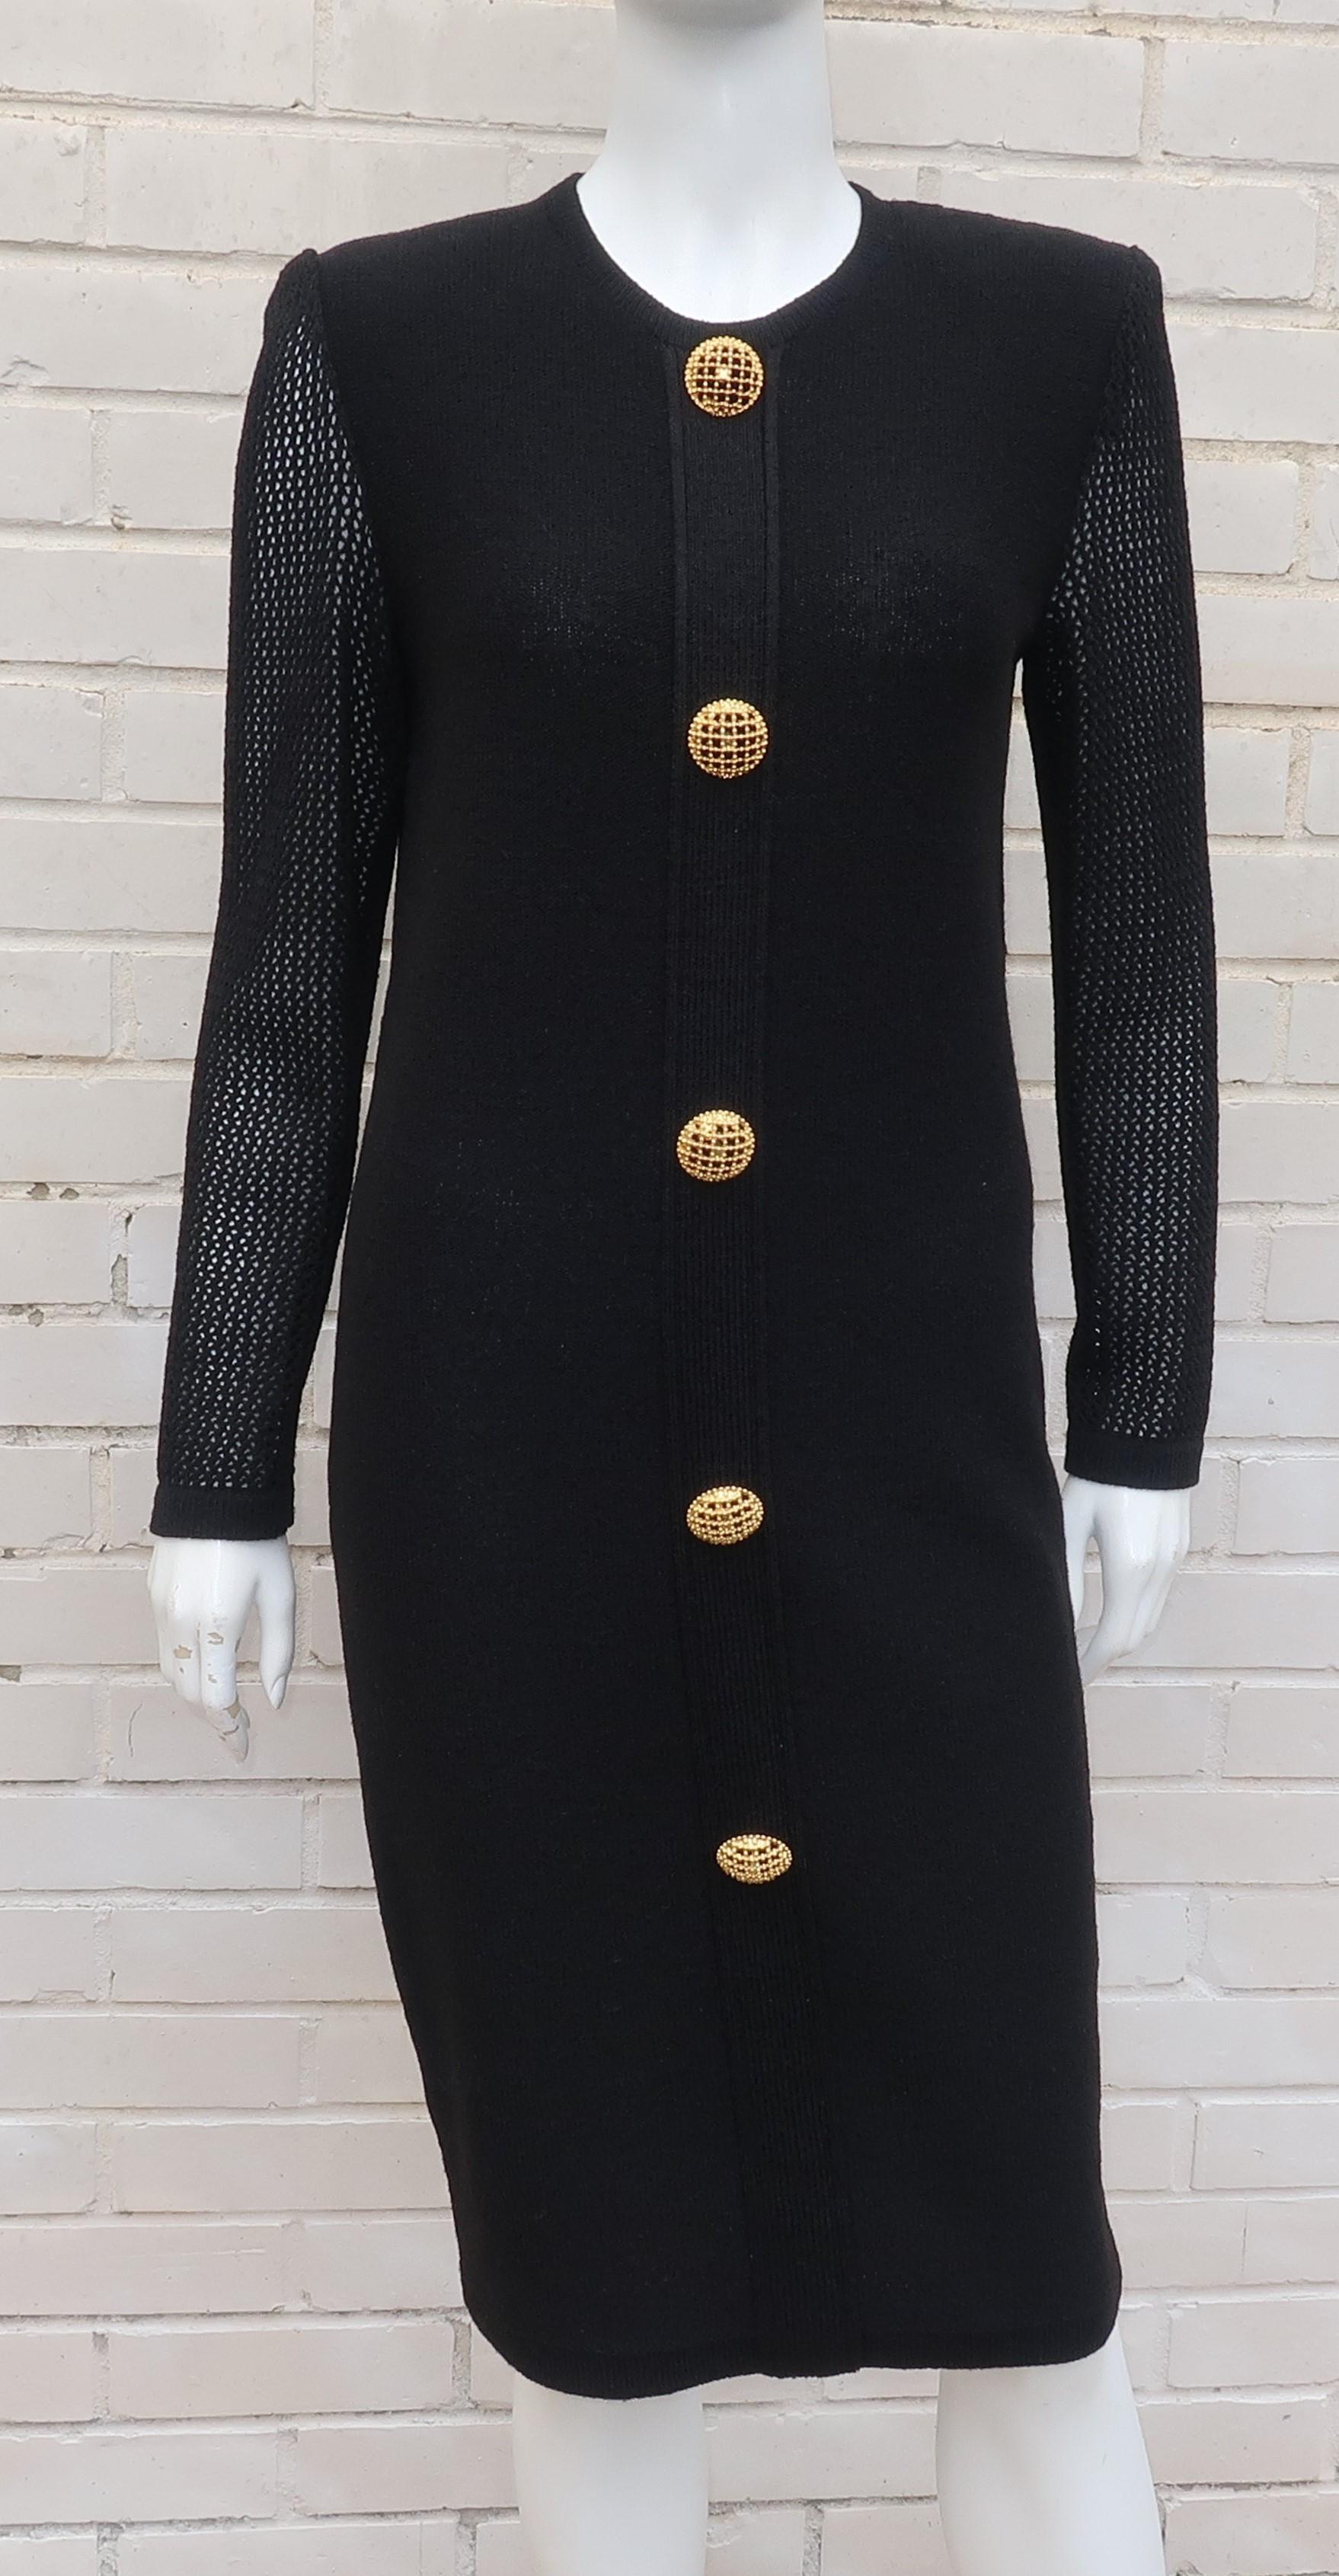 This all occasion Arnold Scaasi black dress is similar in weight and feel to the rayon knitwear favored by the St. John brand.  It zips at the back with a simple sheath silhouette anchored by a shoulder line enhanced with pads and jazzed up by